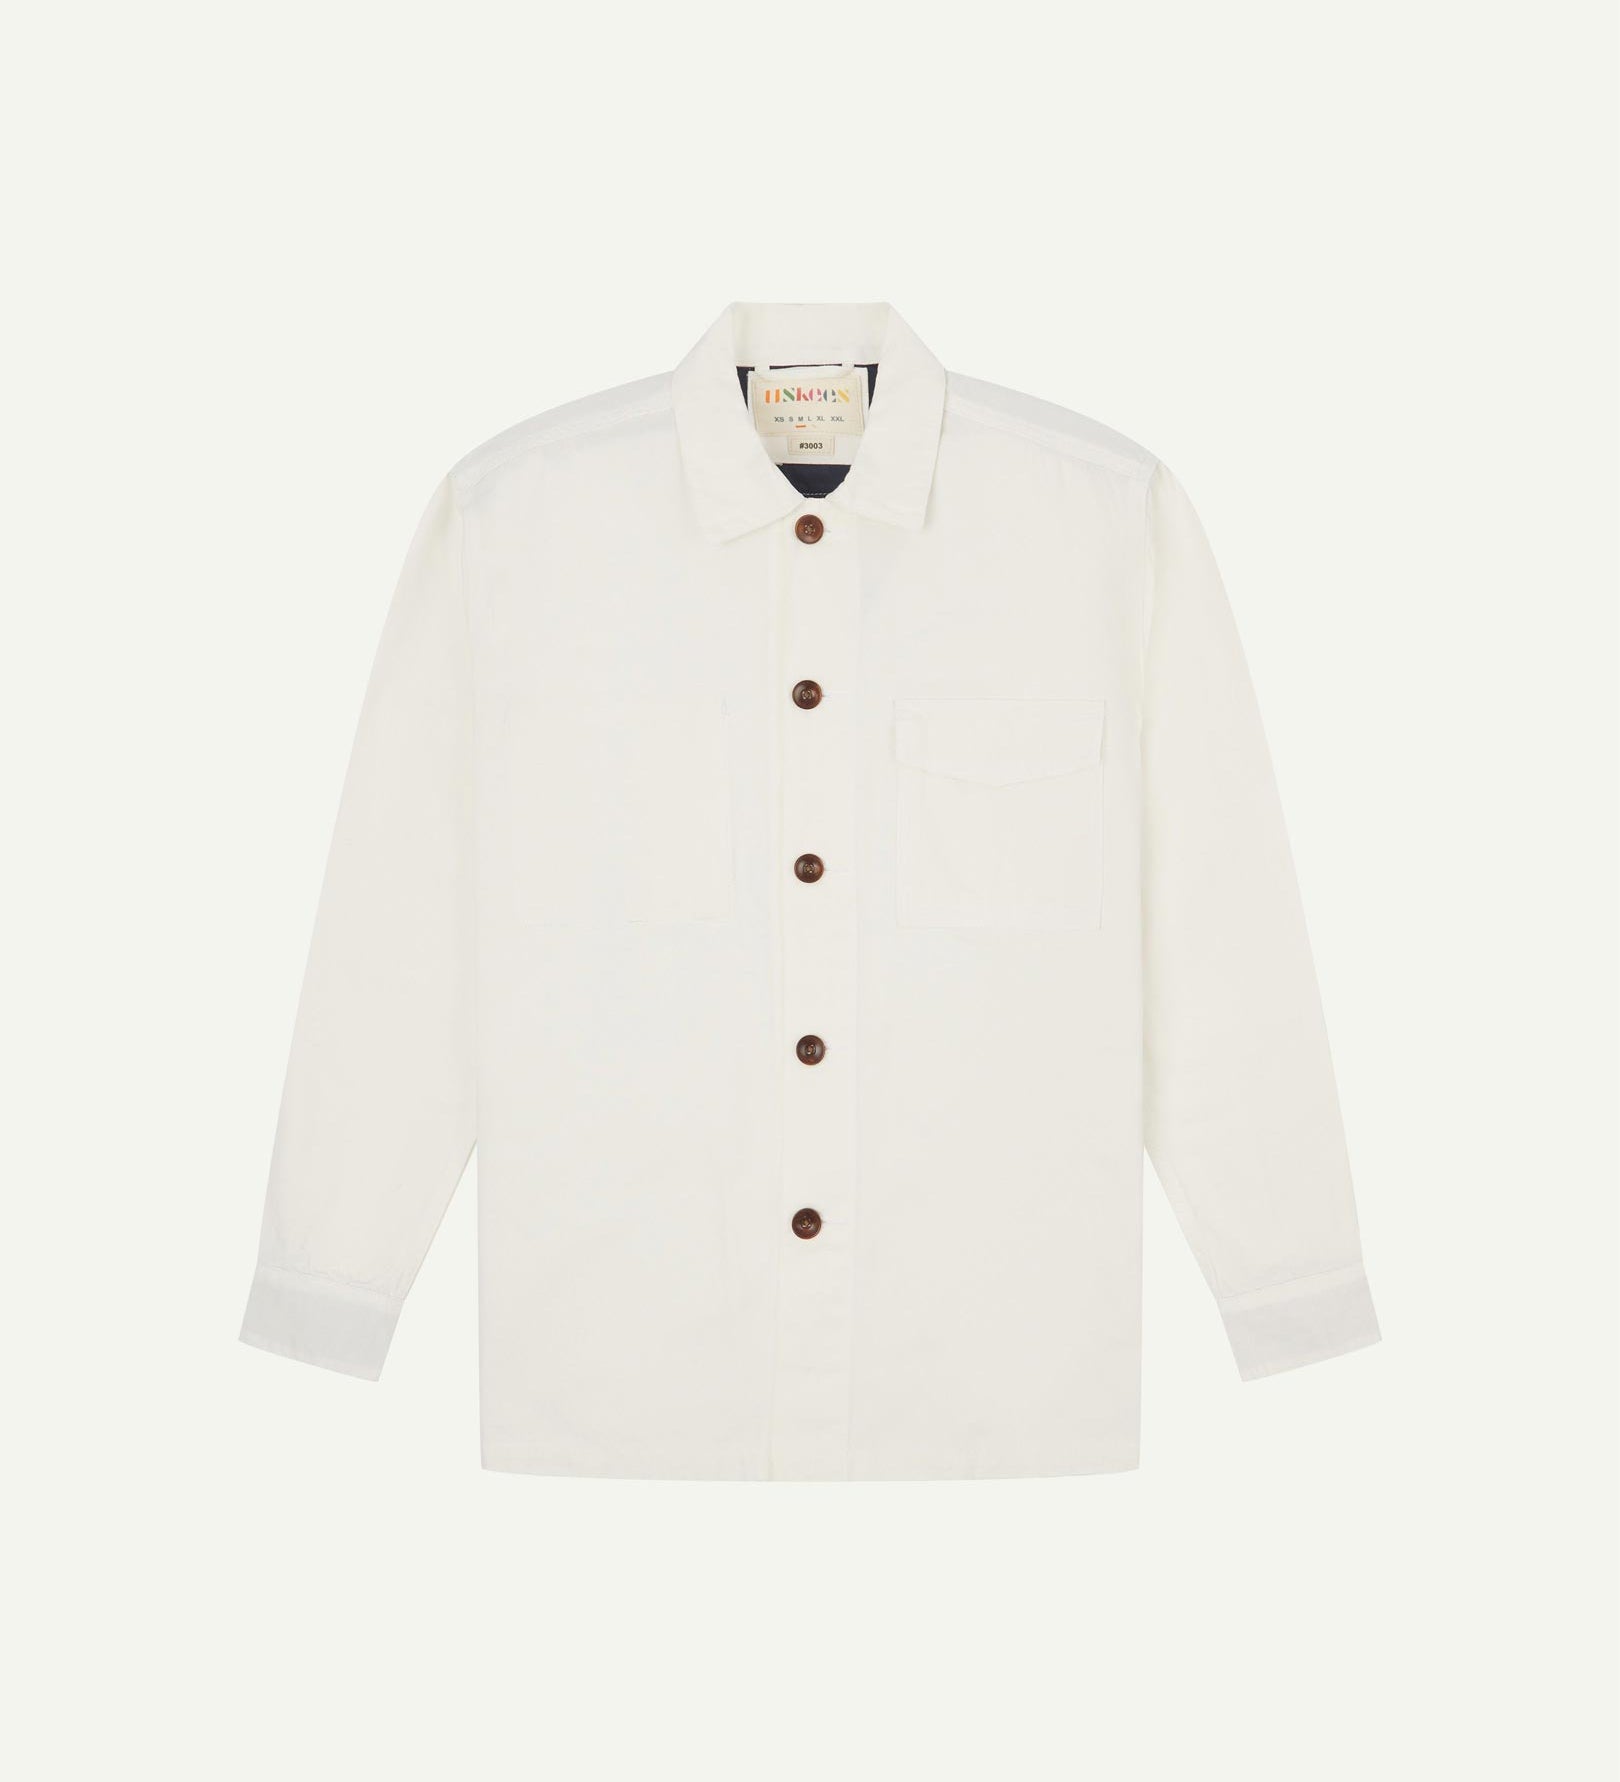 Cream buttoned organic cotton workshirt from Uskees with clear view of chest pocket and Uskees branding label.